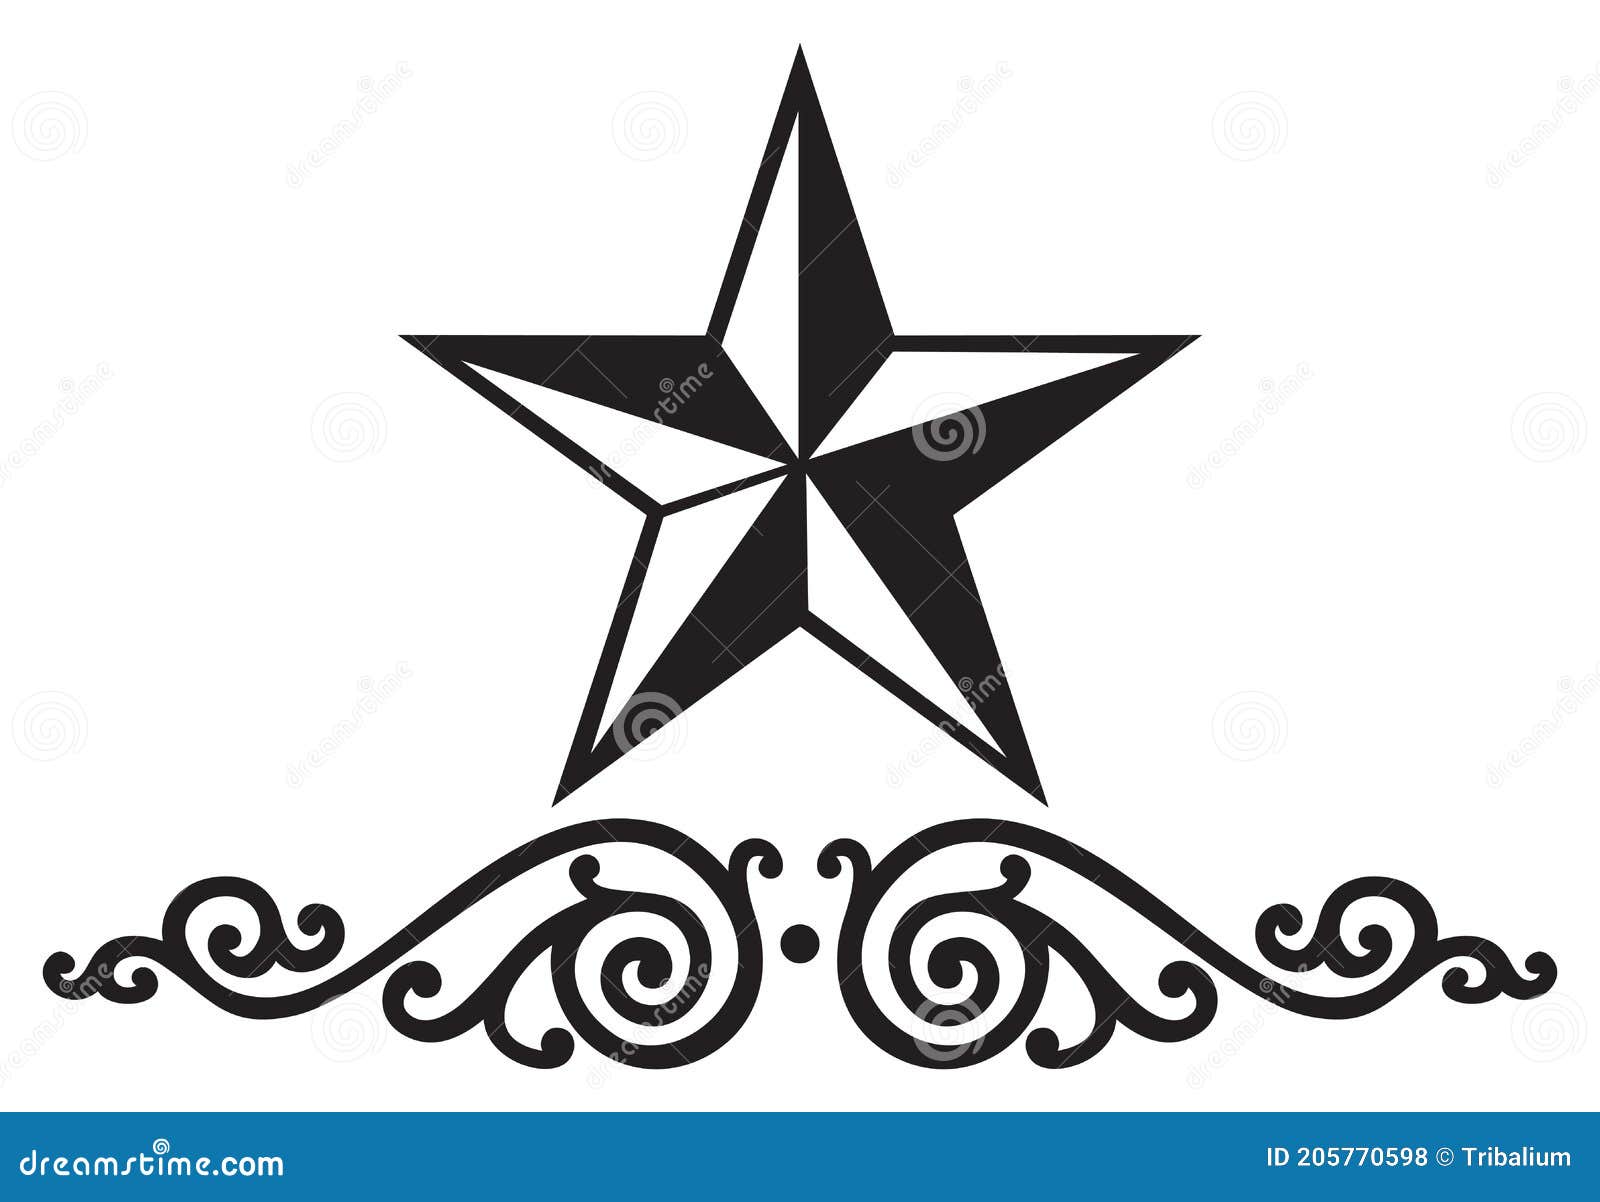 Five pointed star shaped Stock Photos Royalty Free Five pointed star  shaped Images  Depositphotos